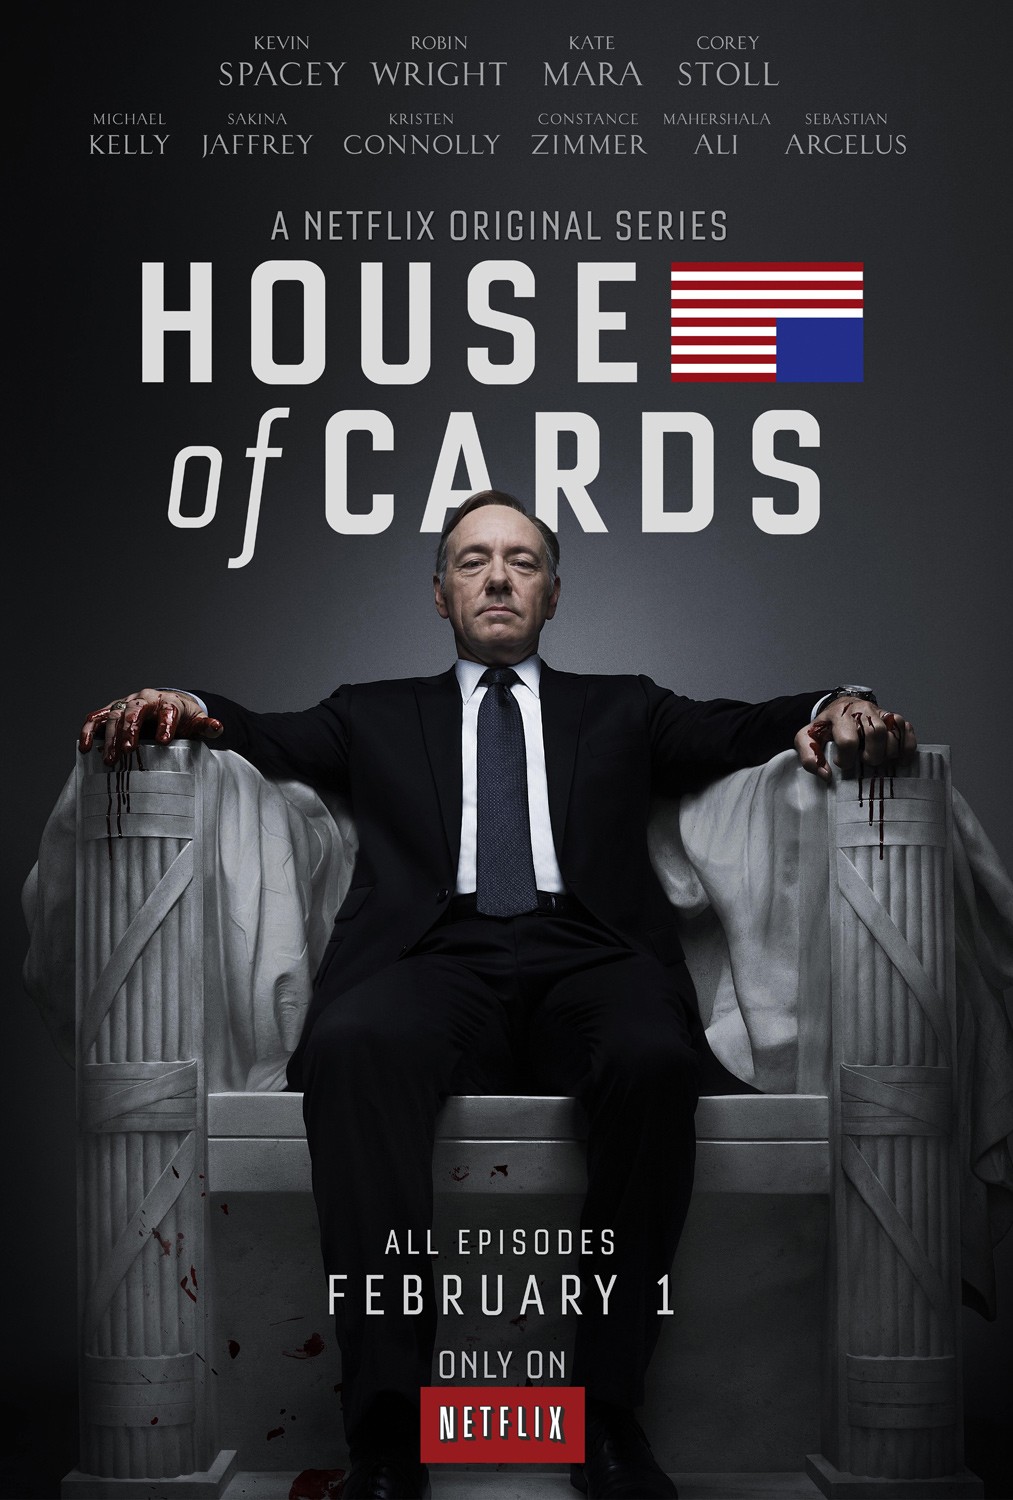 031-house_of_cards_ver2_xlg.jpg